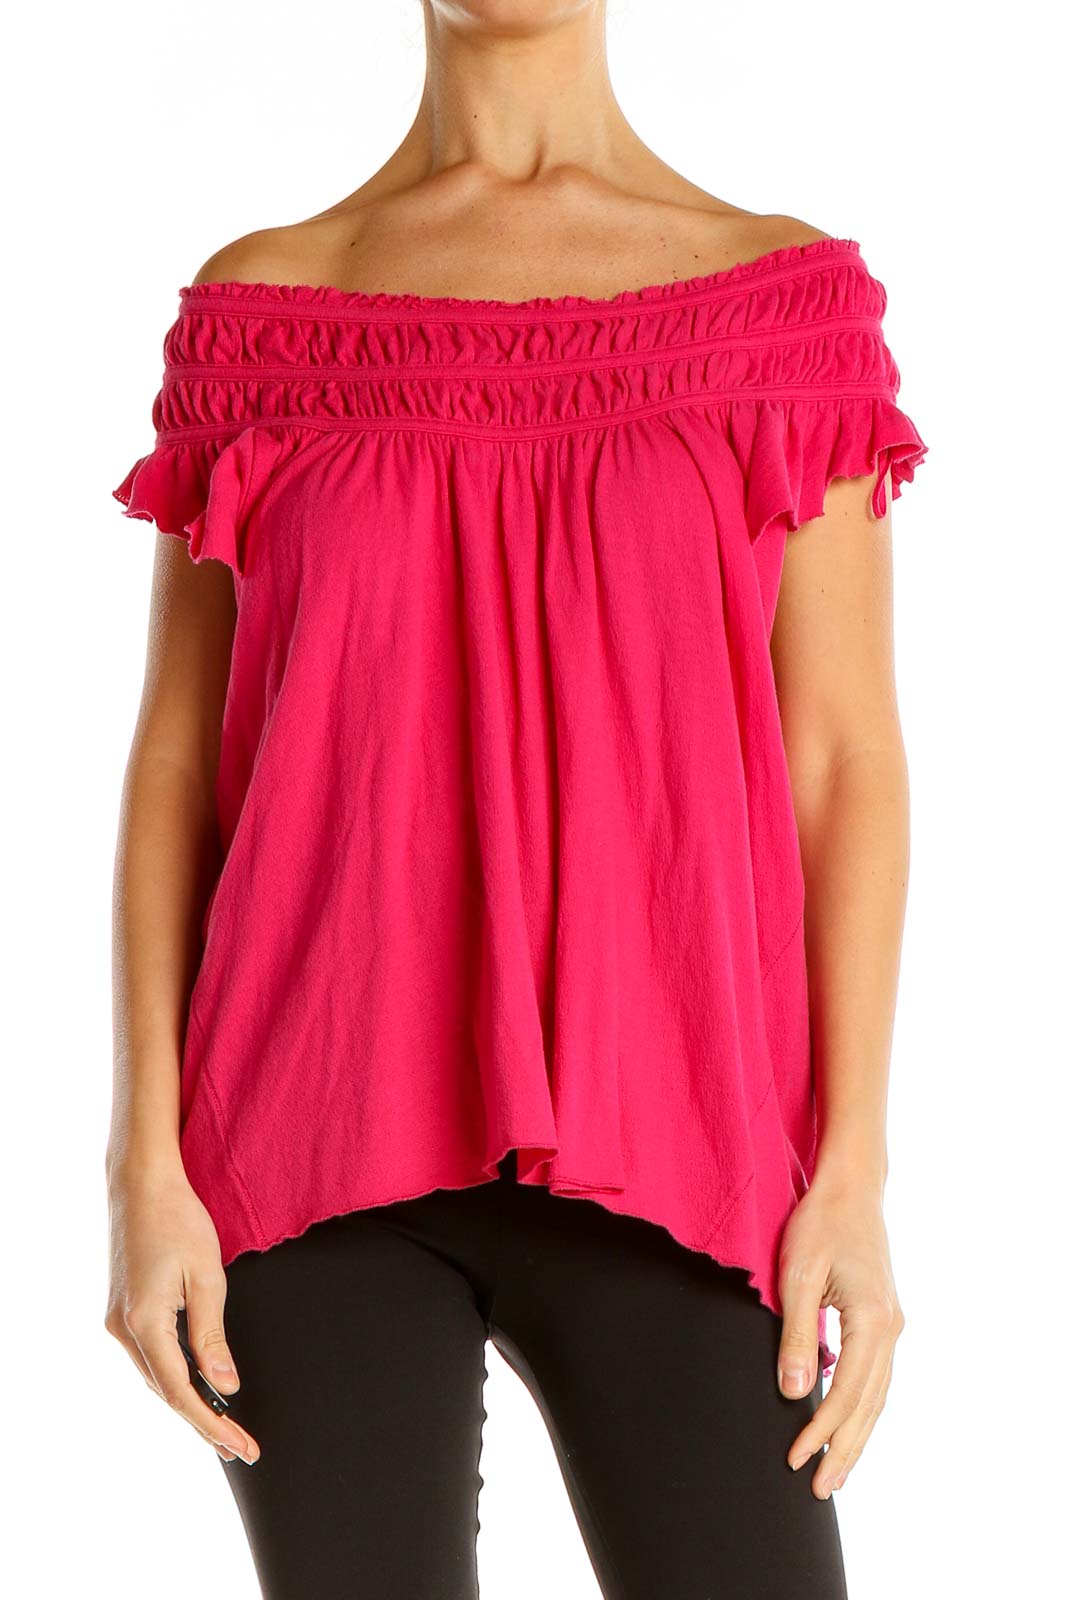 Pink Off The Shoulder Holiday Top Front